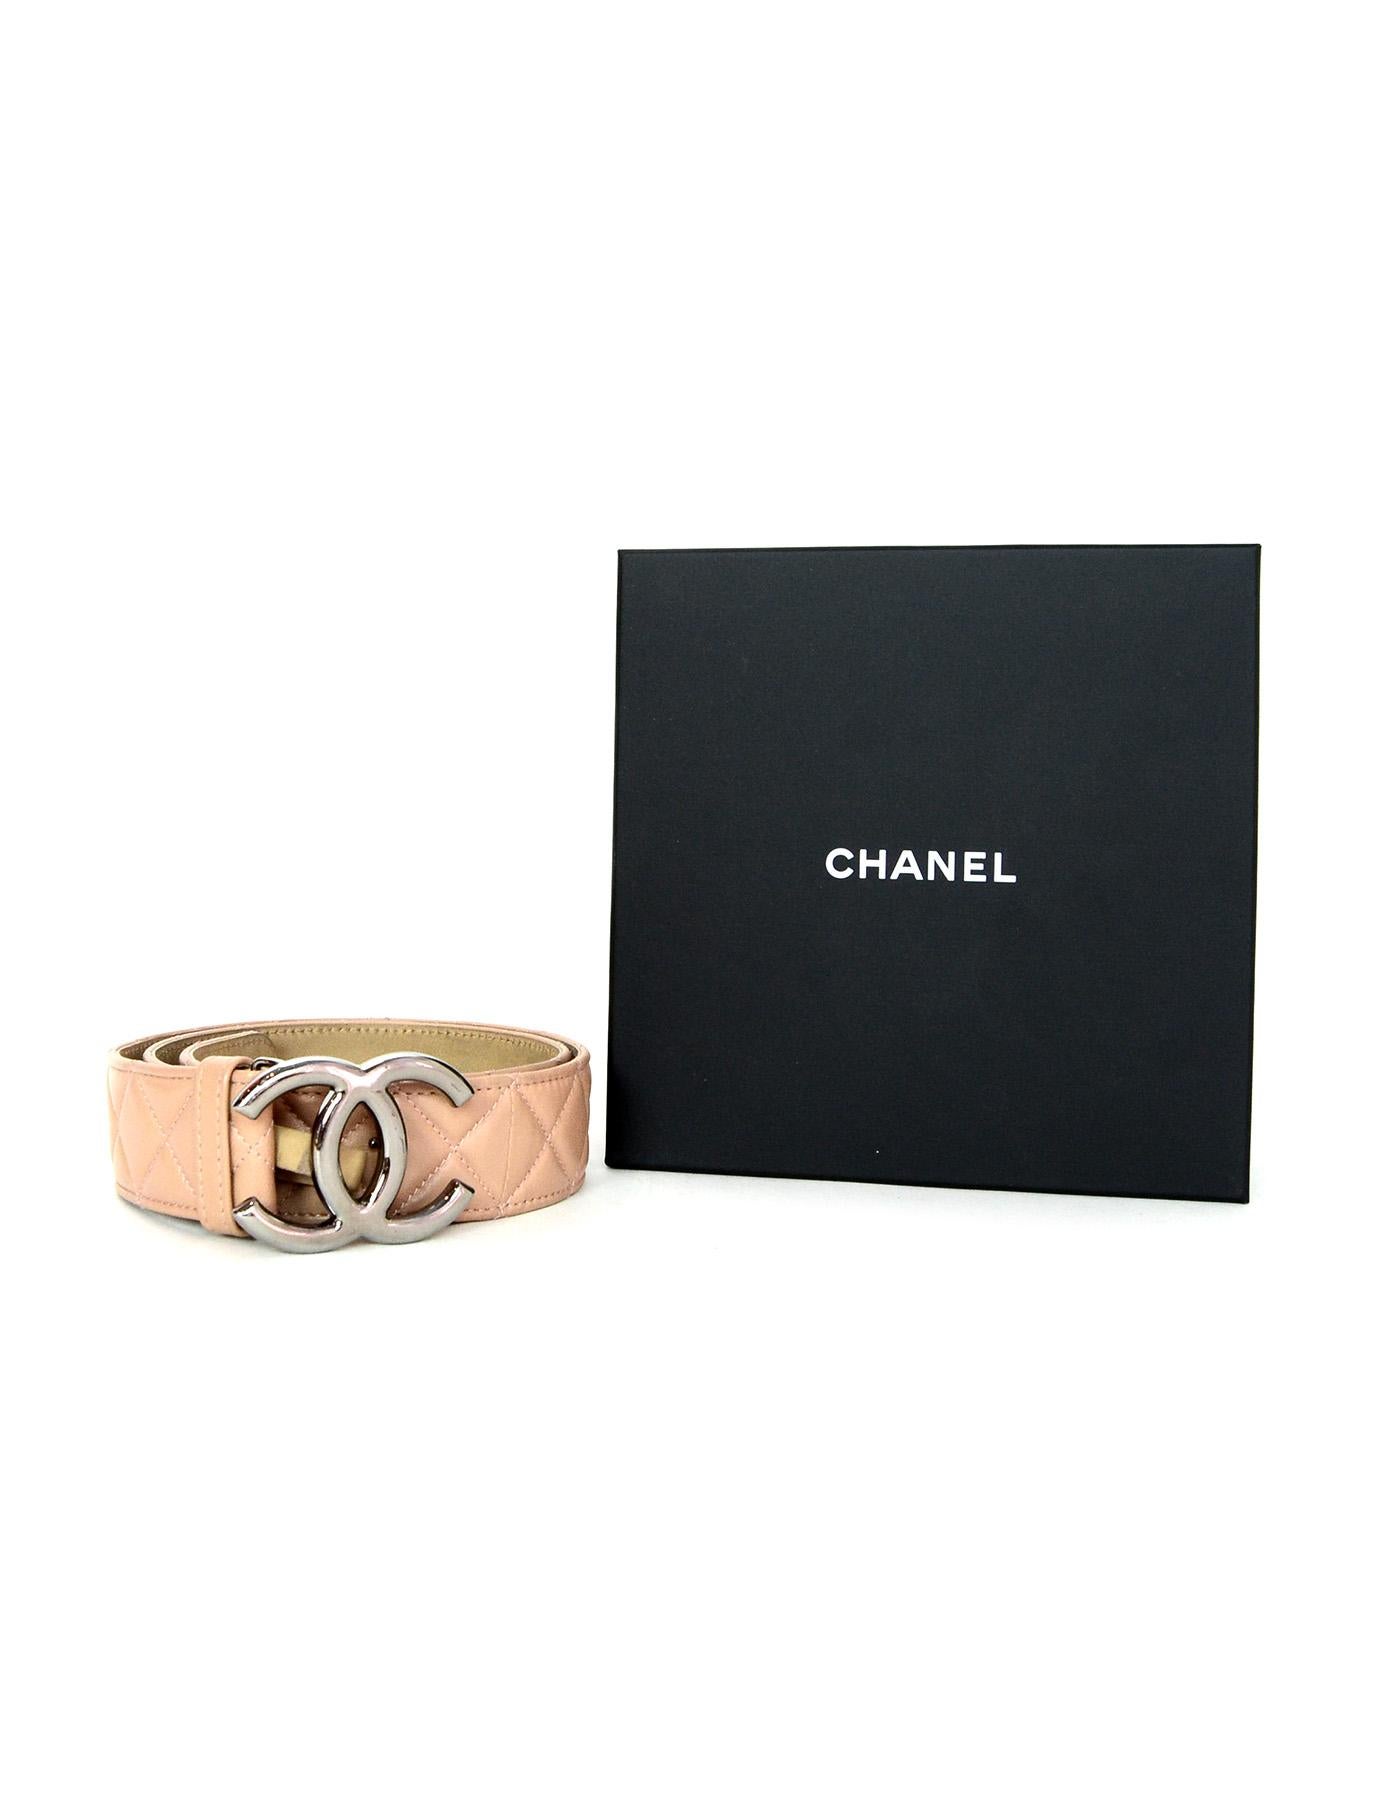 Chanel 2014 Nude Lambskin Leather Quilted CC Belt sz 90/32 4